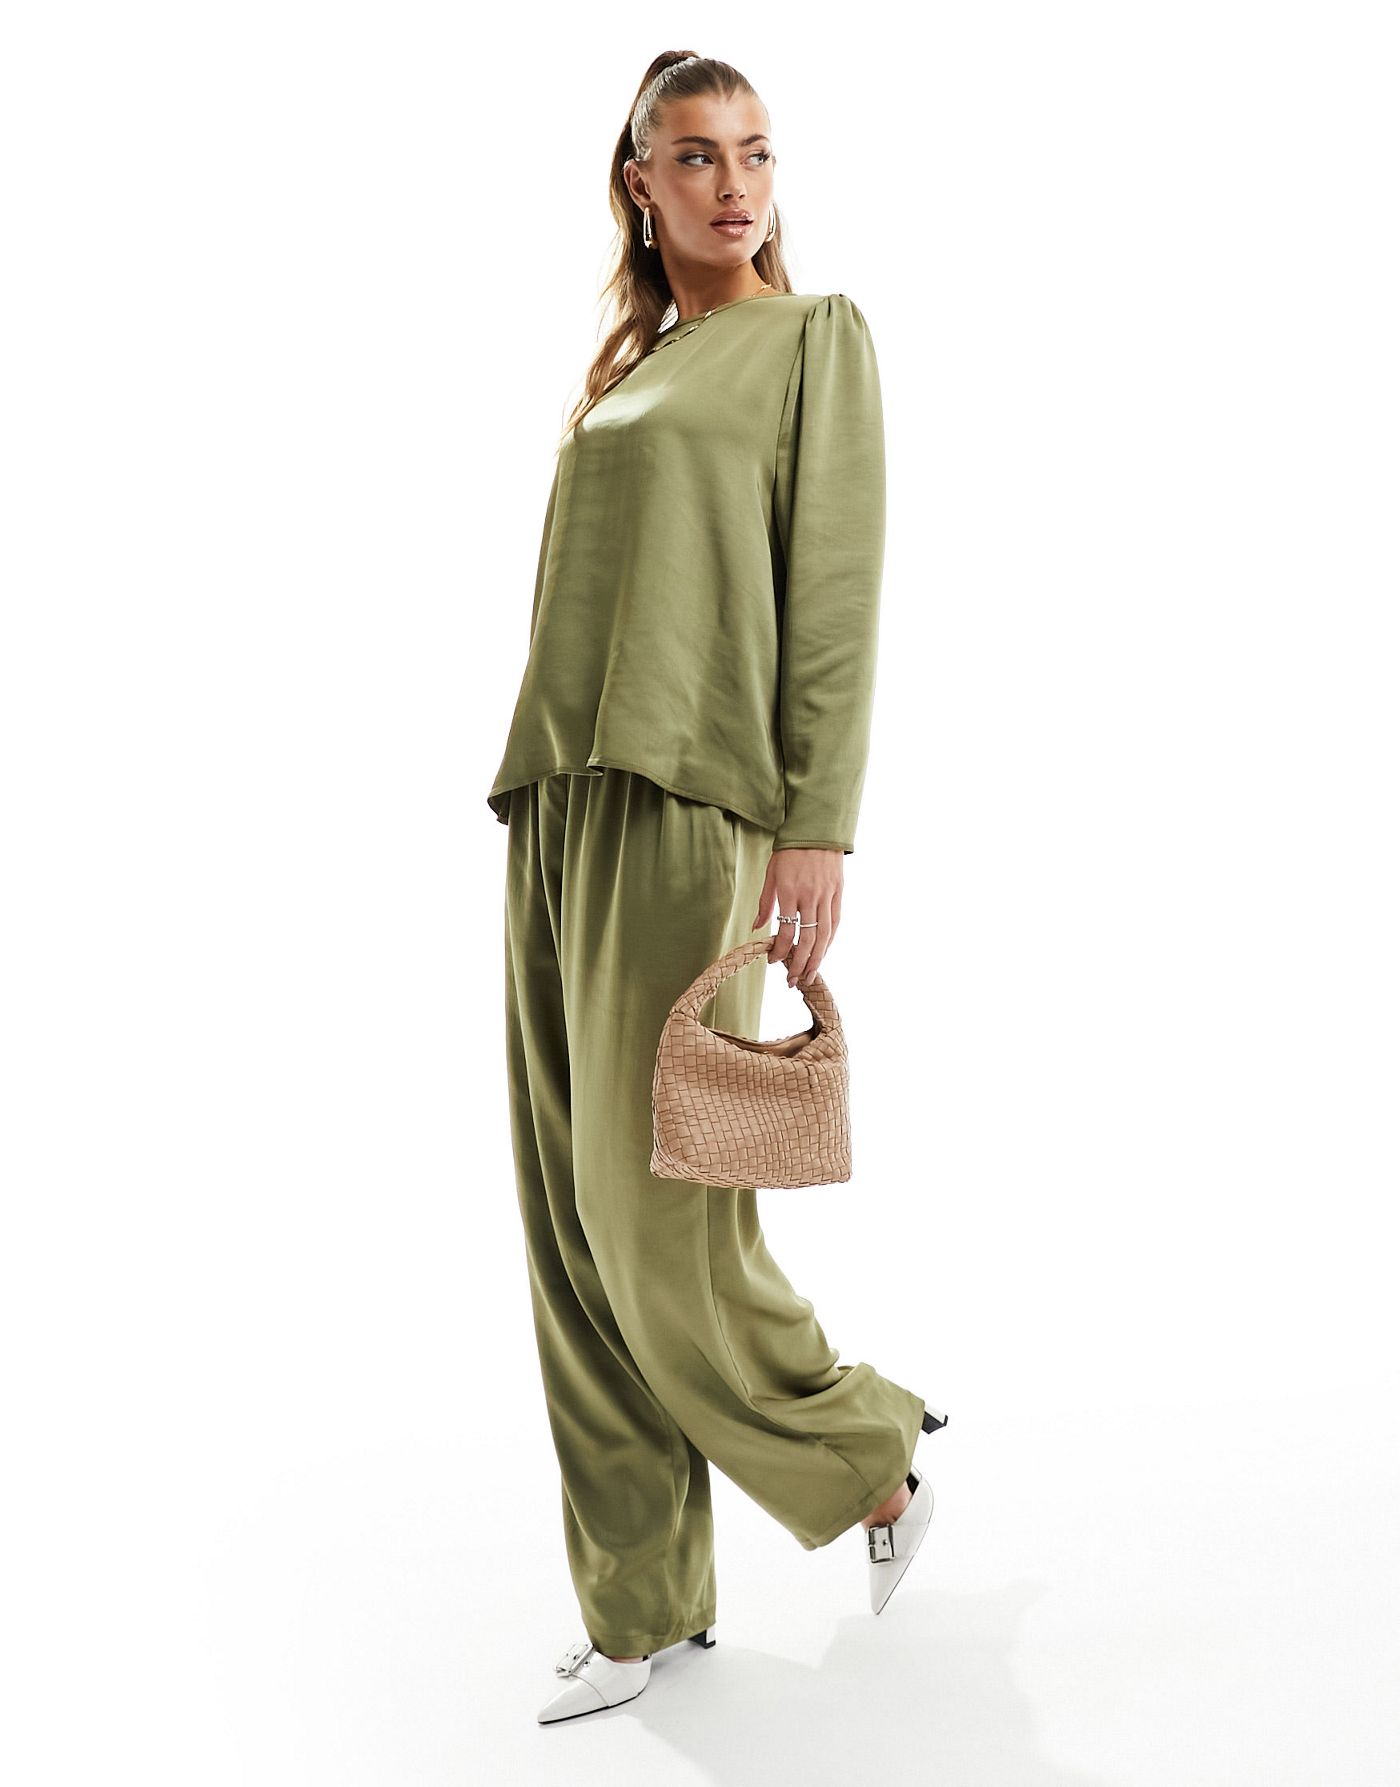 Flounce London satin oversized top in olive co-ord